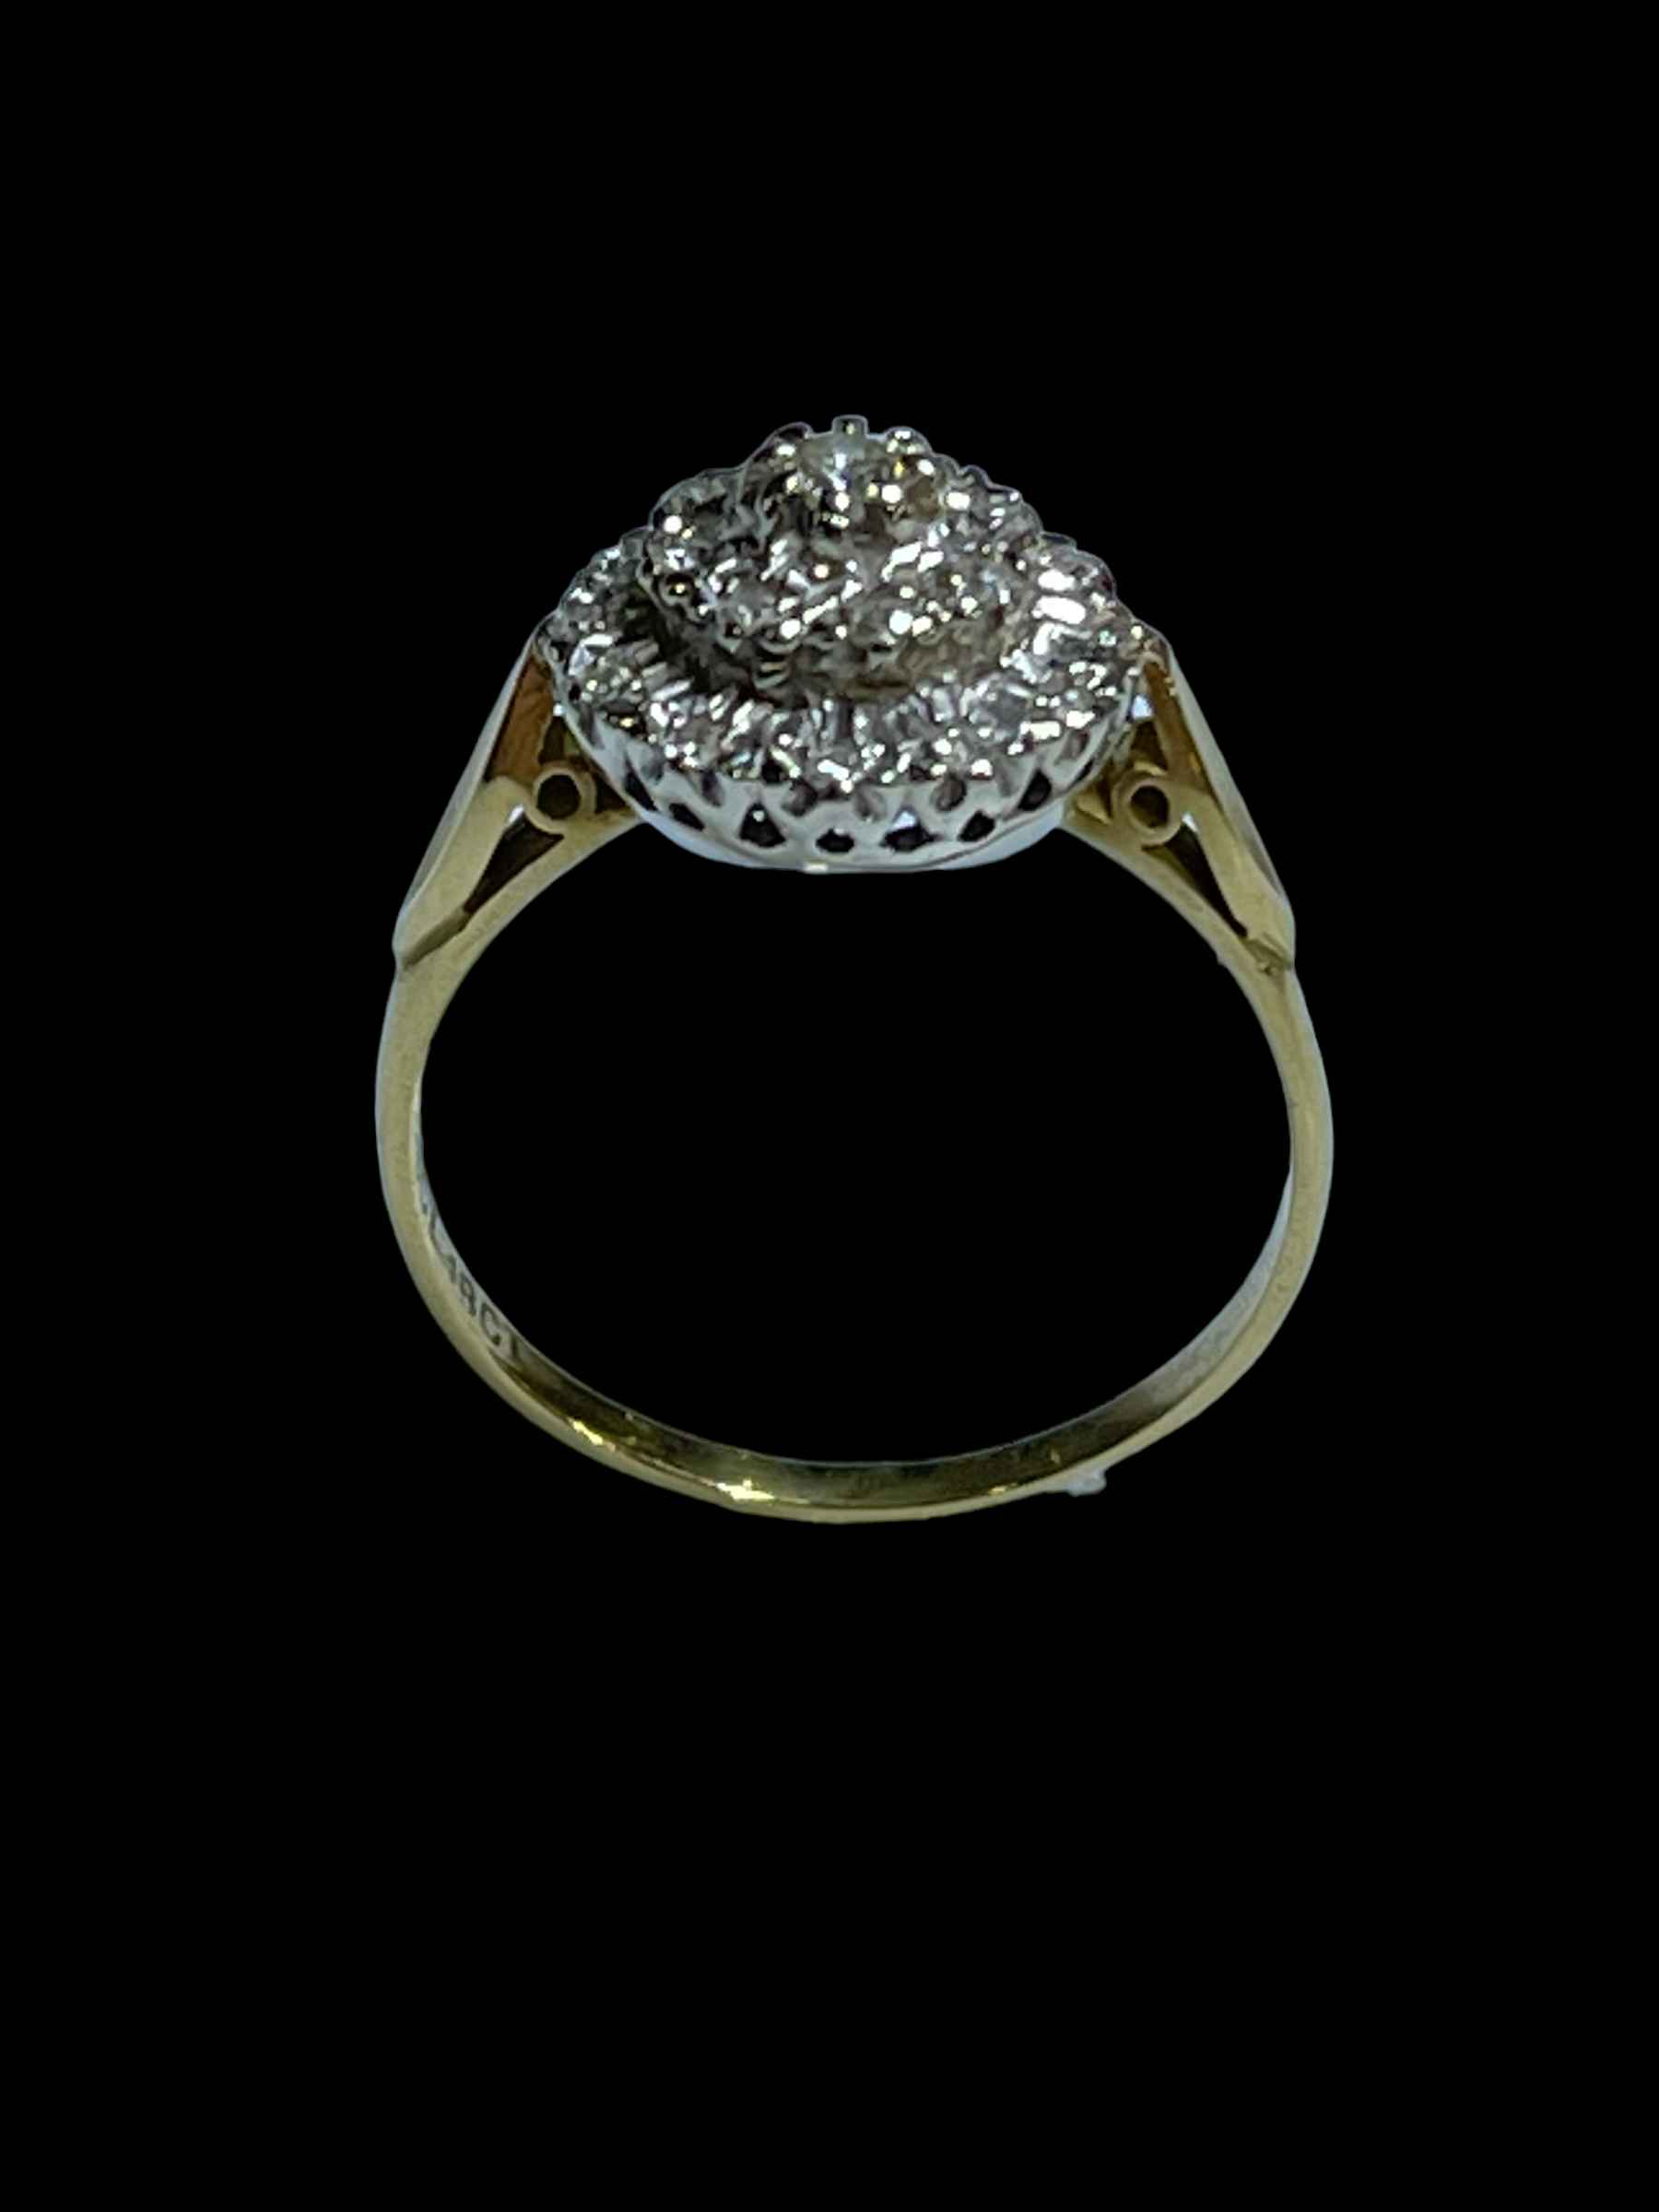 Diamond cluster 18 carat gold ring, size R. - Image 2 of 2